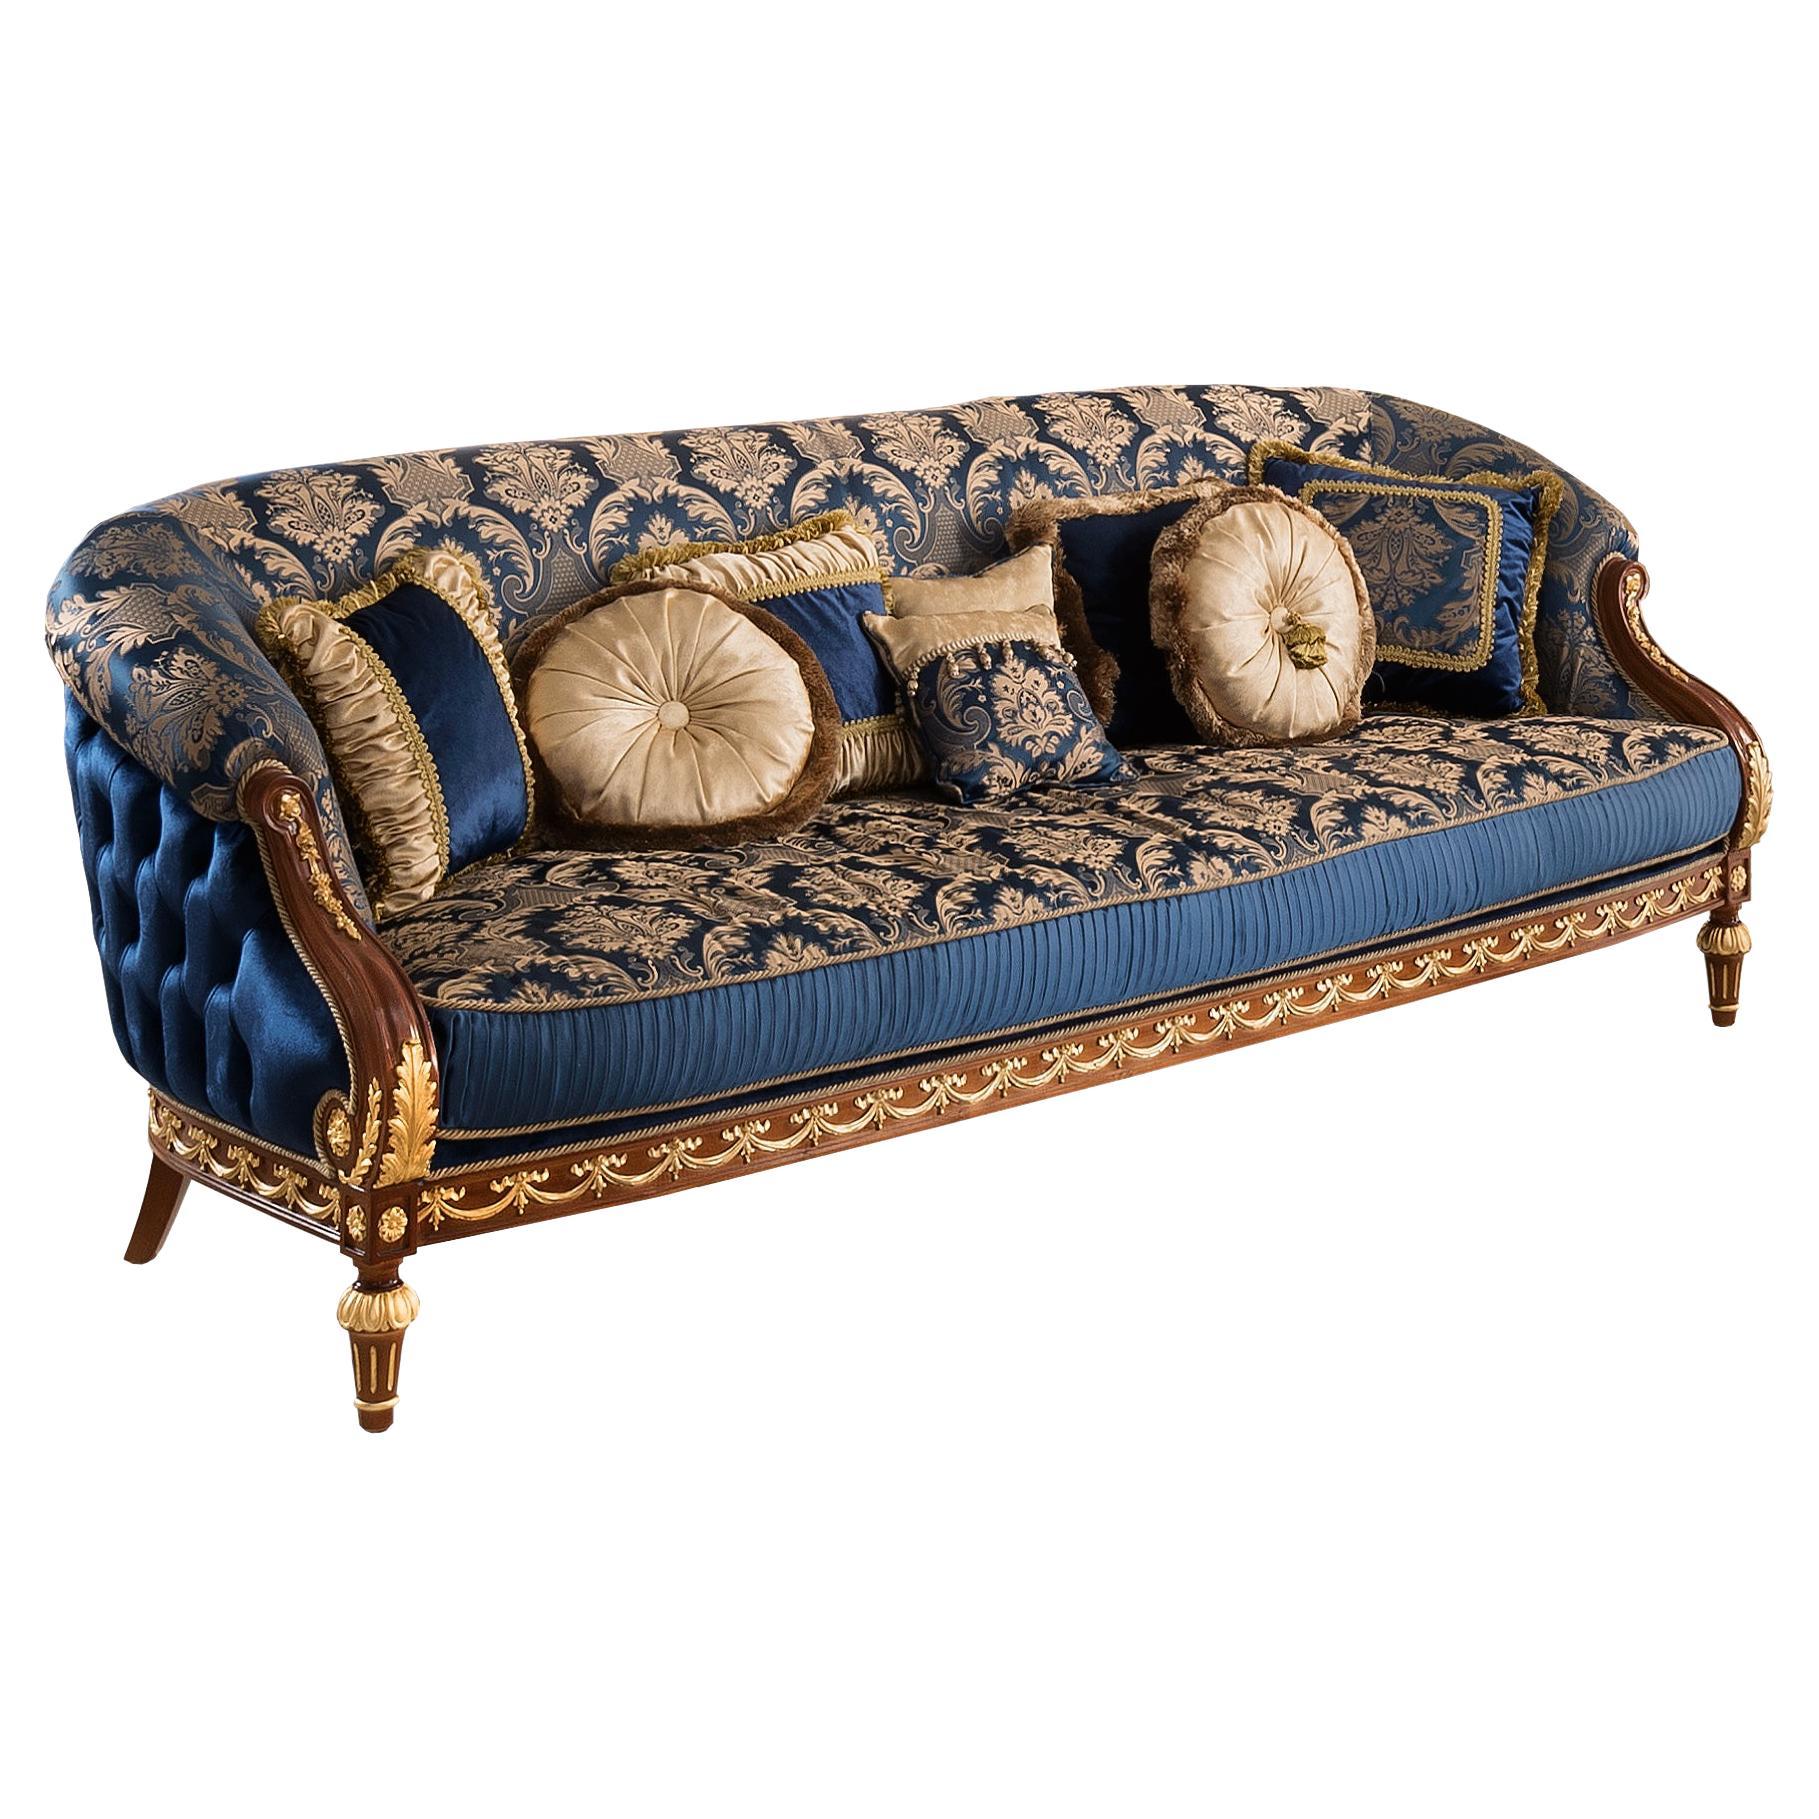  Royal Neoclassical Sofa in High Quality Cherry Wood and Shiny Gold Leaf Decor For Sale